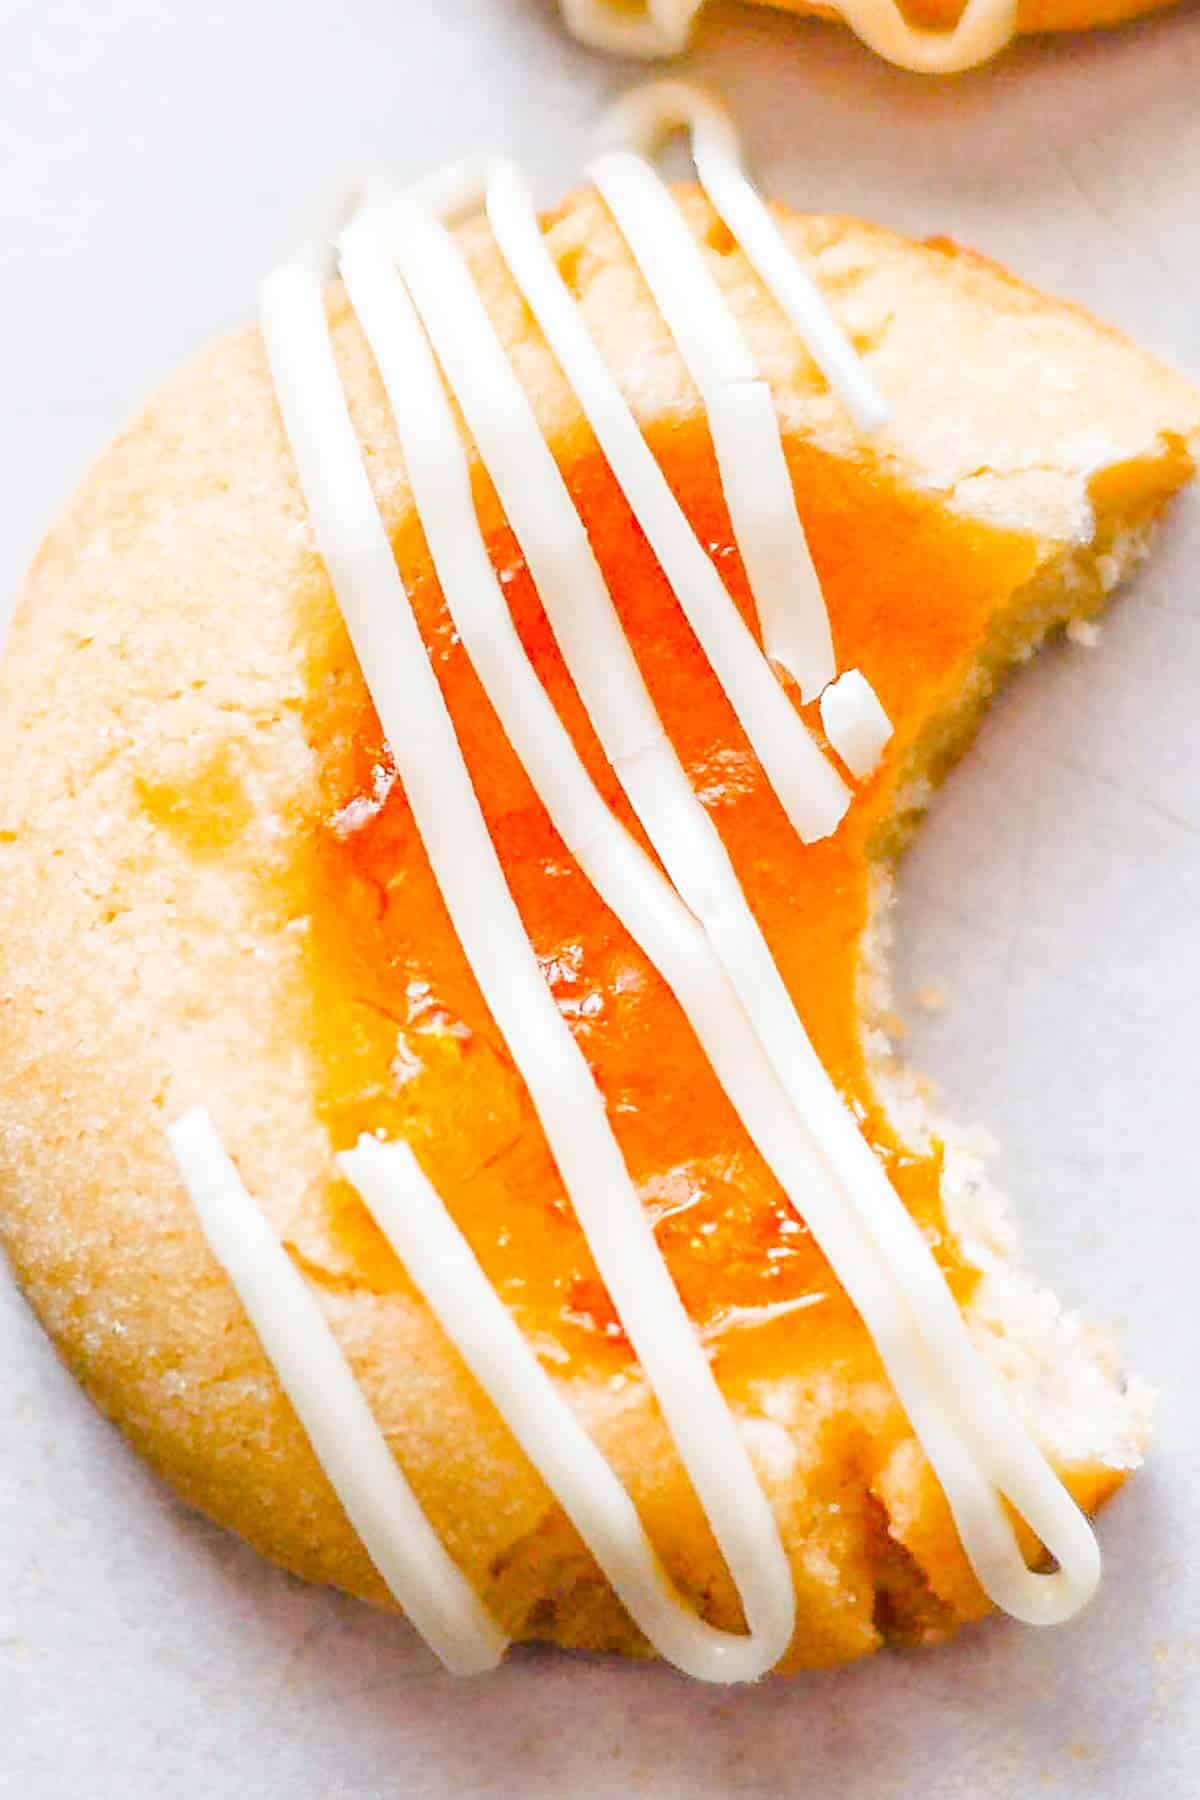 Thumbprint cookie with a bite out of it.